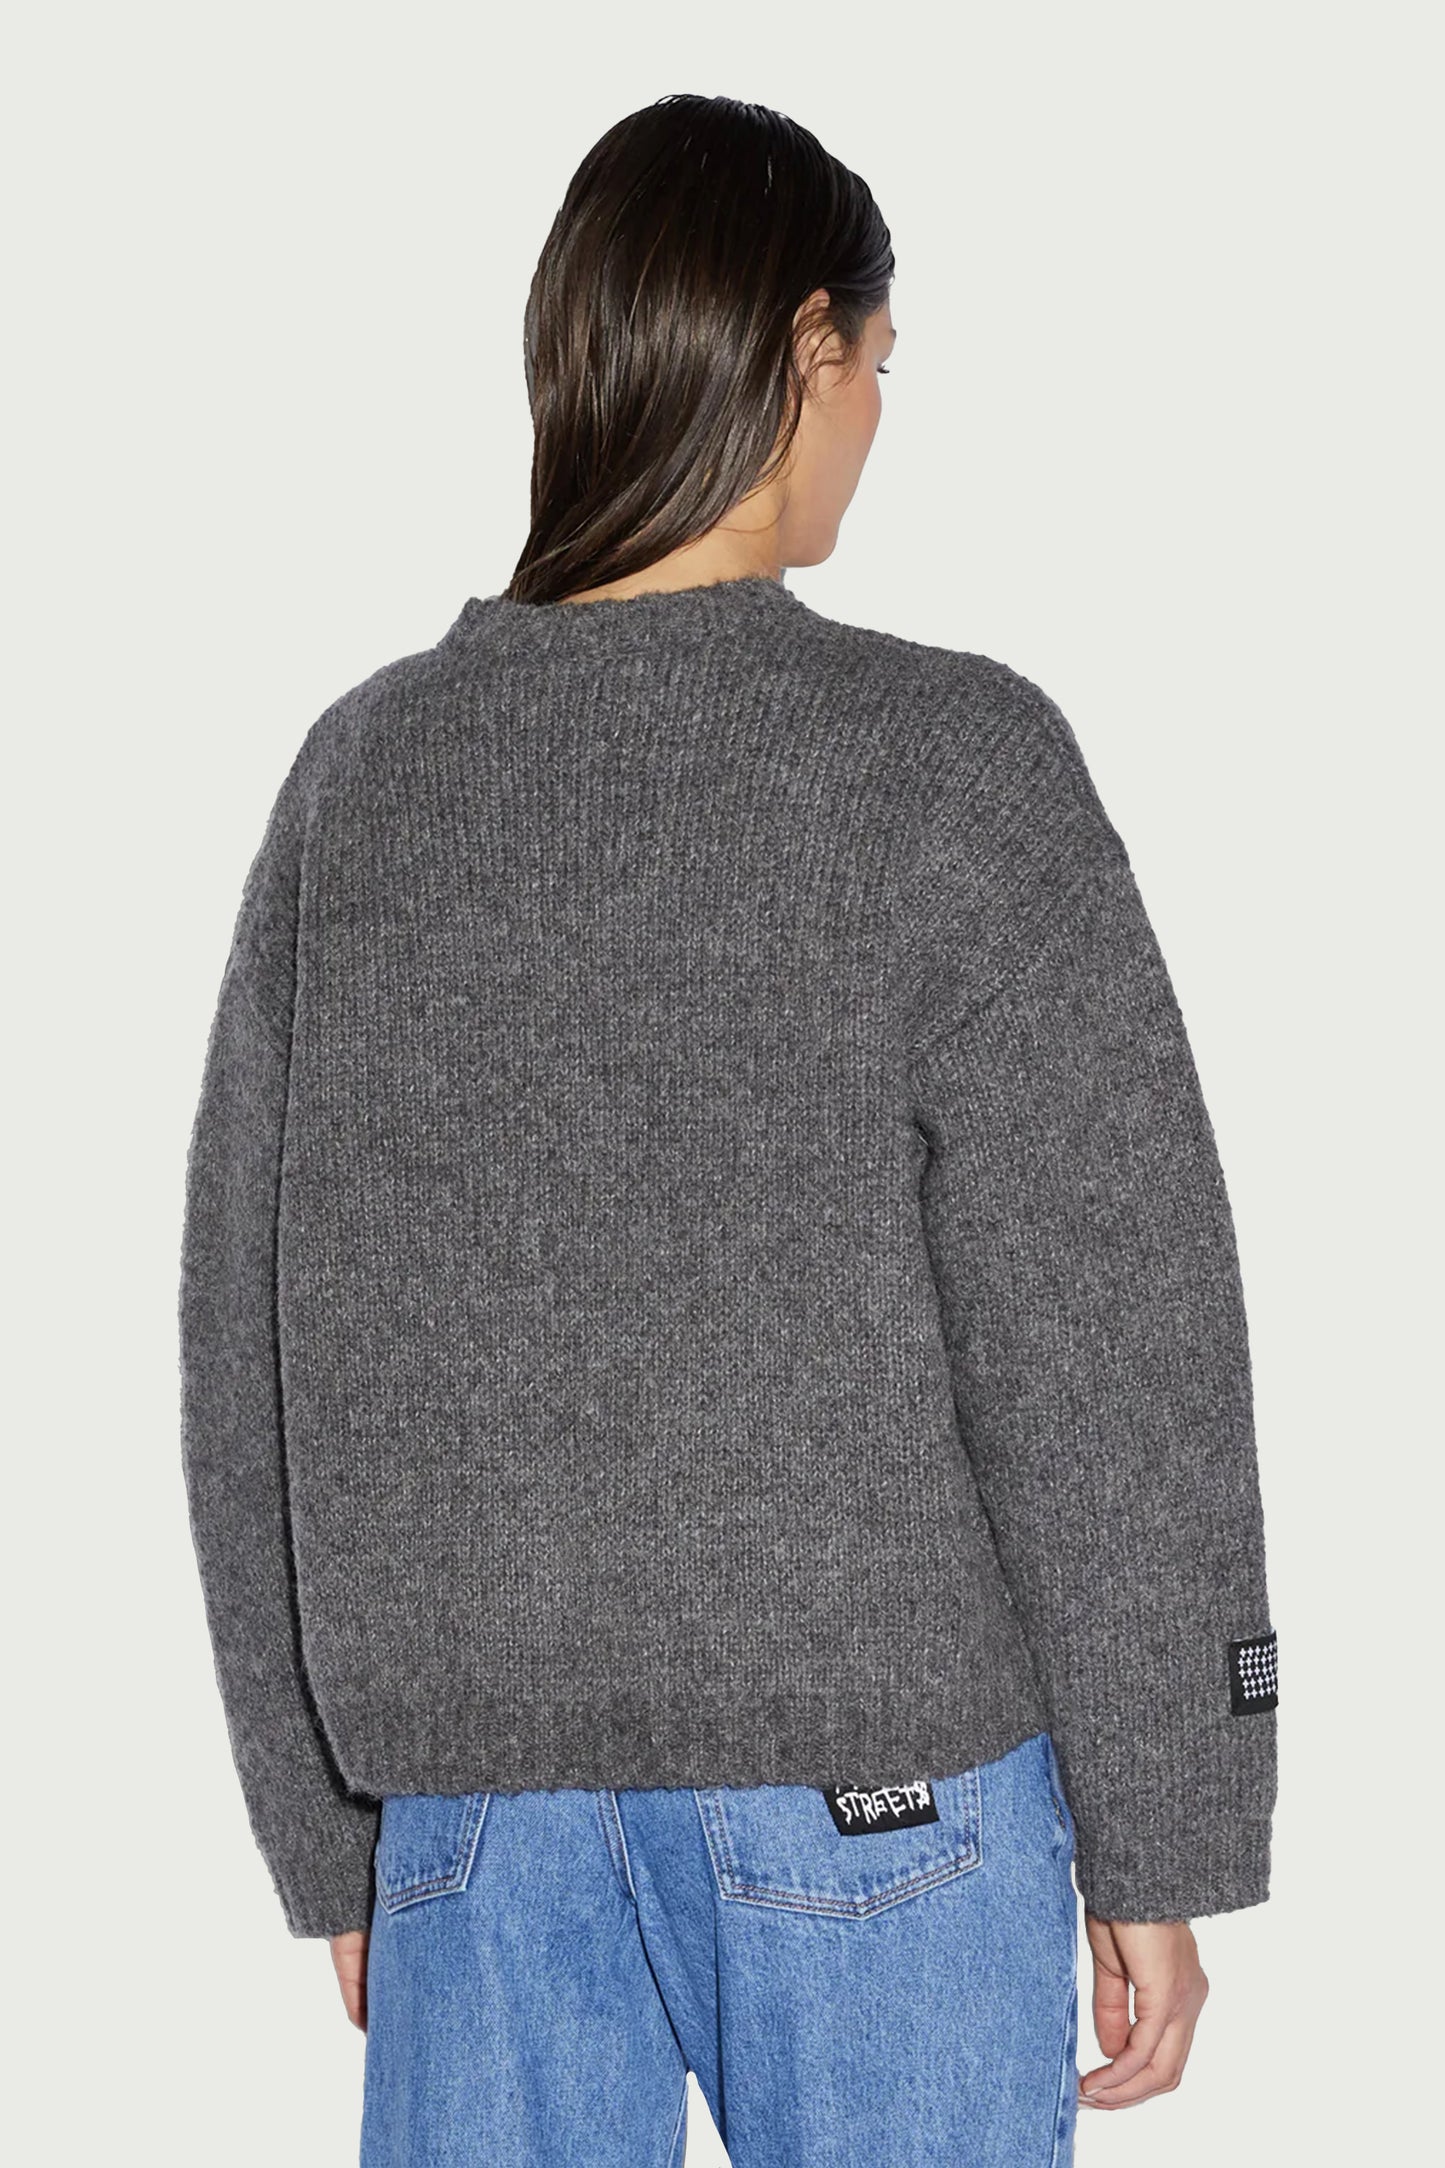 MOMENT SWEATER CHARCOAL